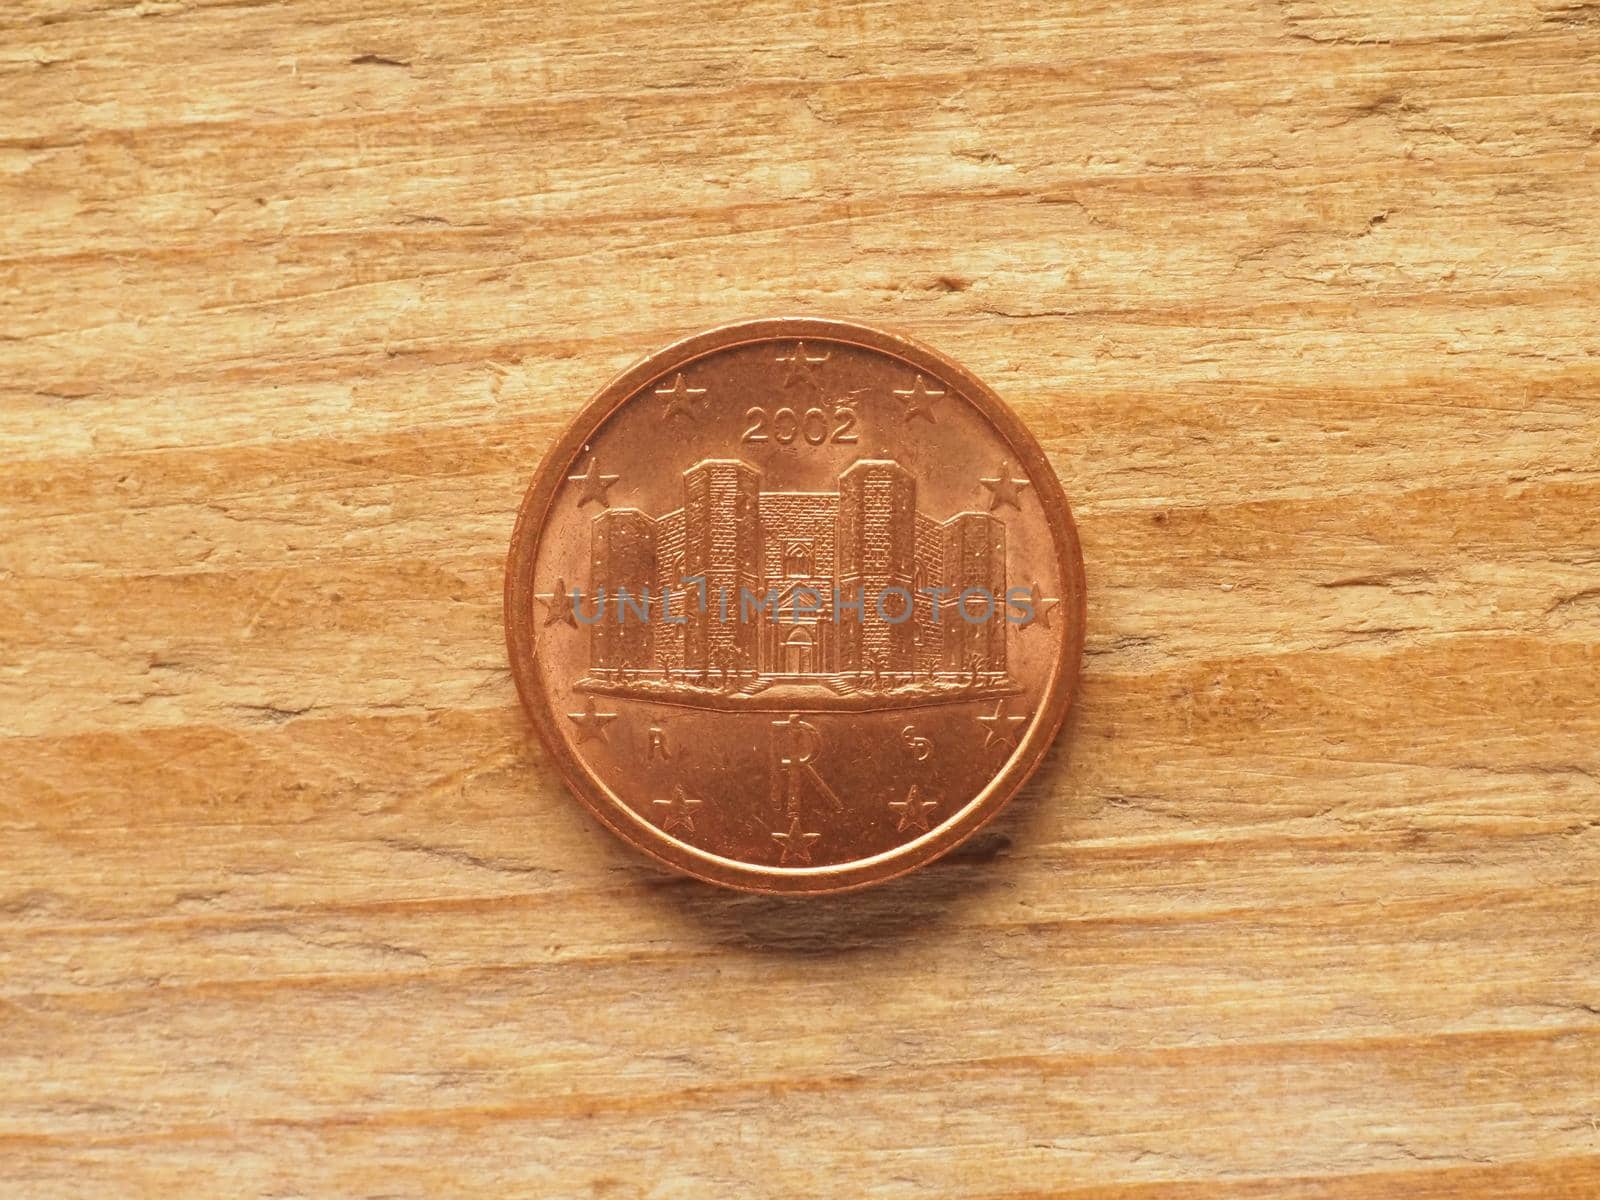 1 cent coin showing Castel del Monte, currency of Italy, EU by claudiodivizia